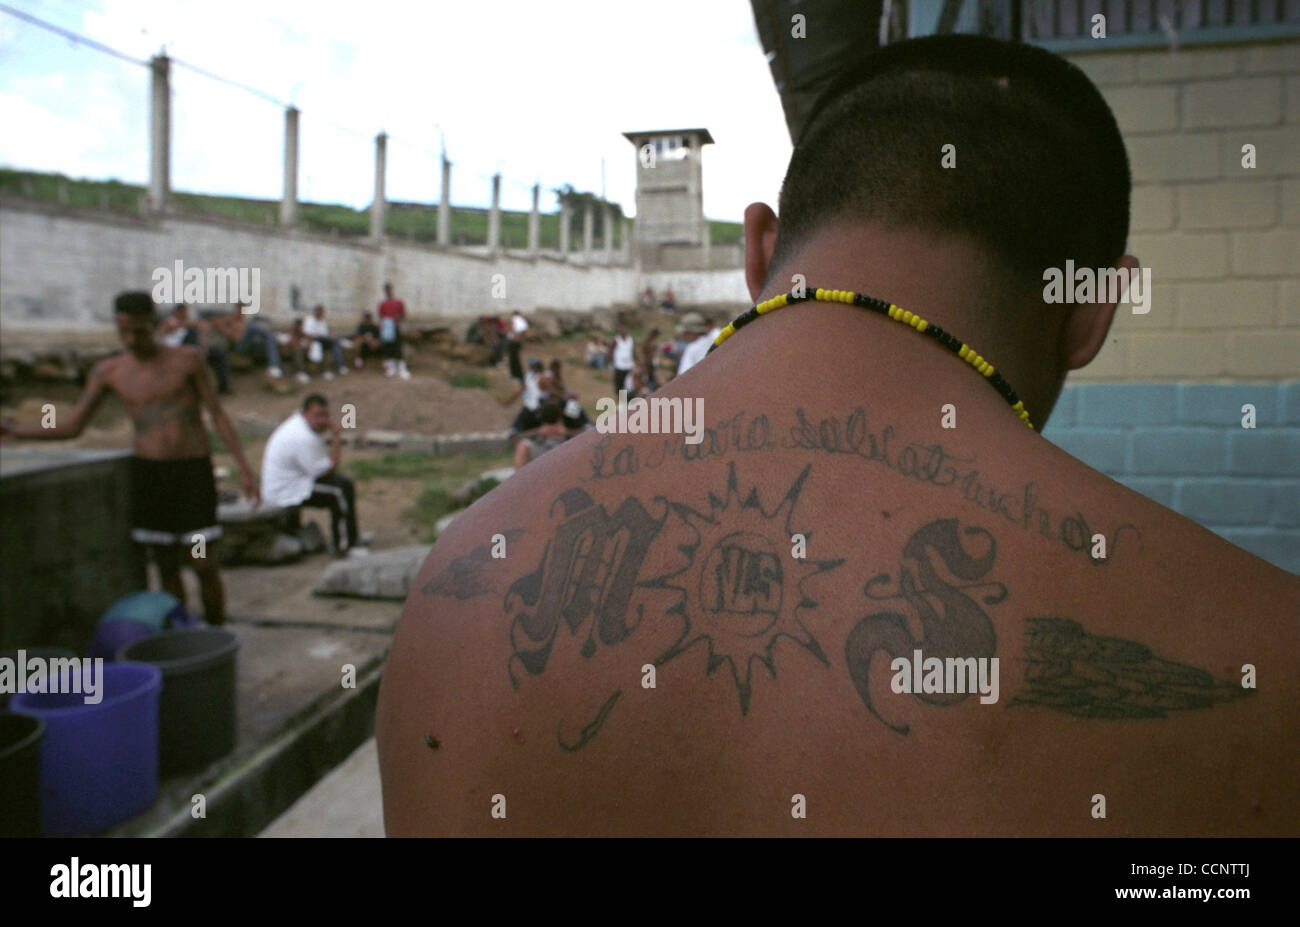 After a May 2004 prison fire in San Pedro Sula, Honduras, claimed the lives of 107 members of the Mara Salvatrucha 13, surviving gang members were transferred to an overcrowded cellblock in a federal penitentiary outside Tegucigalpa, Honduras.  Photographer:  Luis J. Jimenez City: Tegucigalpa  Count Stock Photo